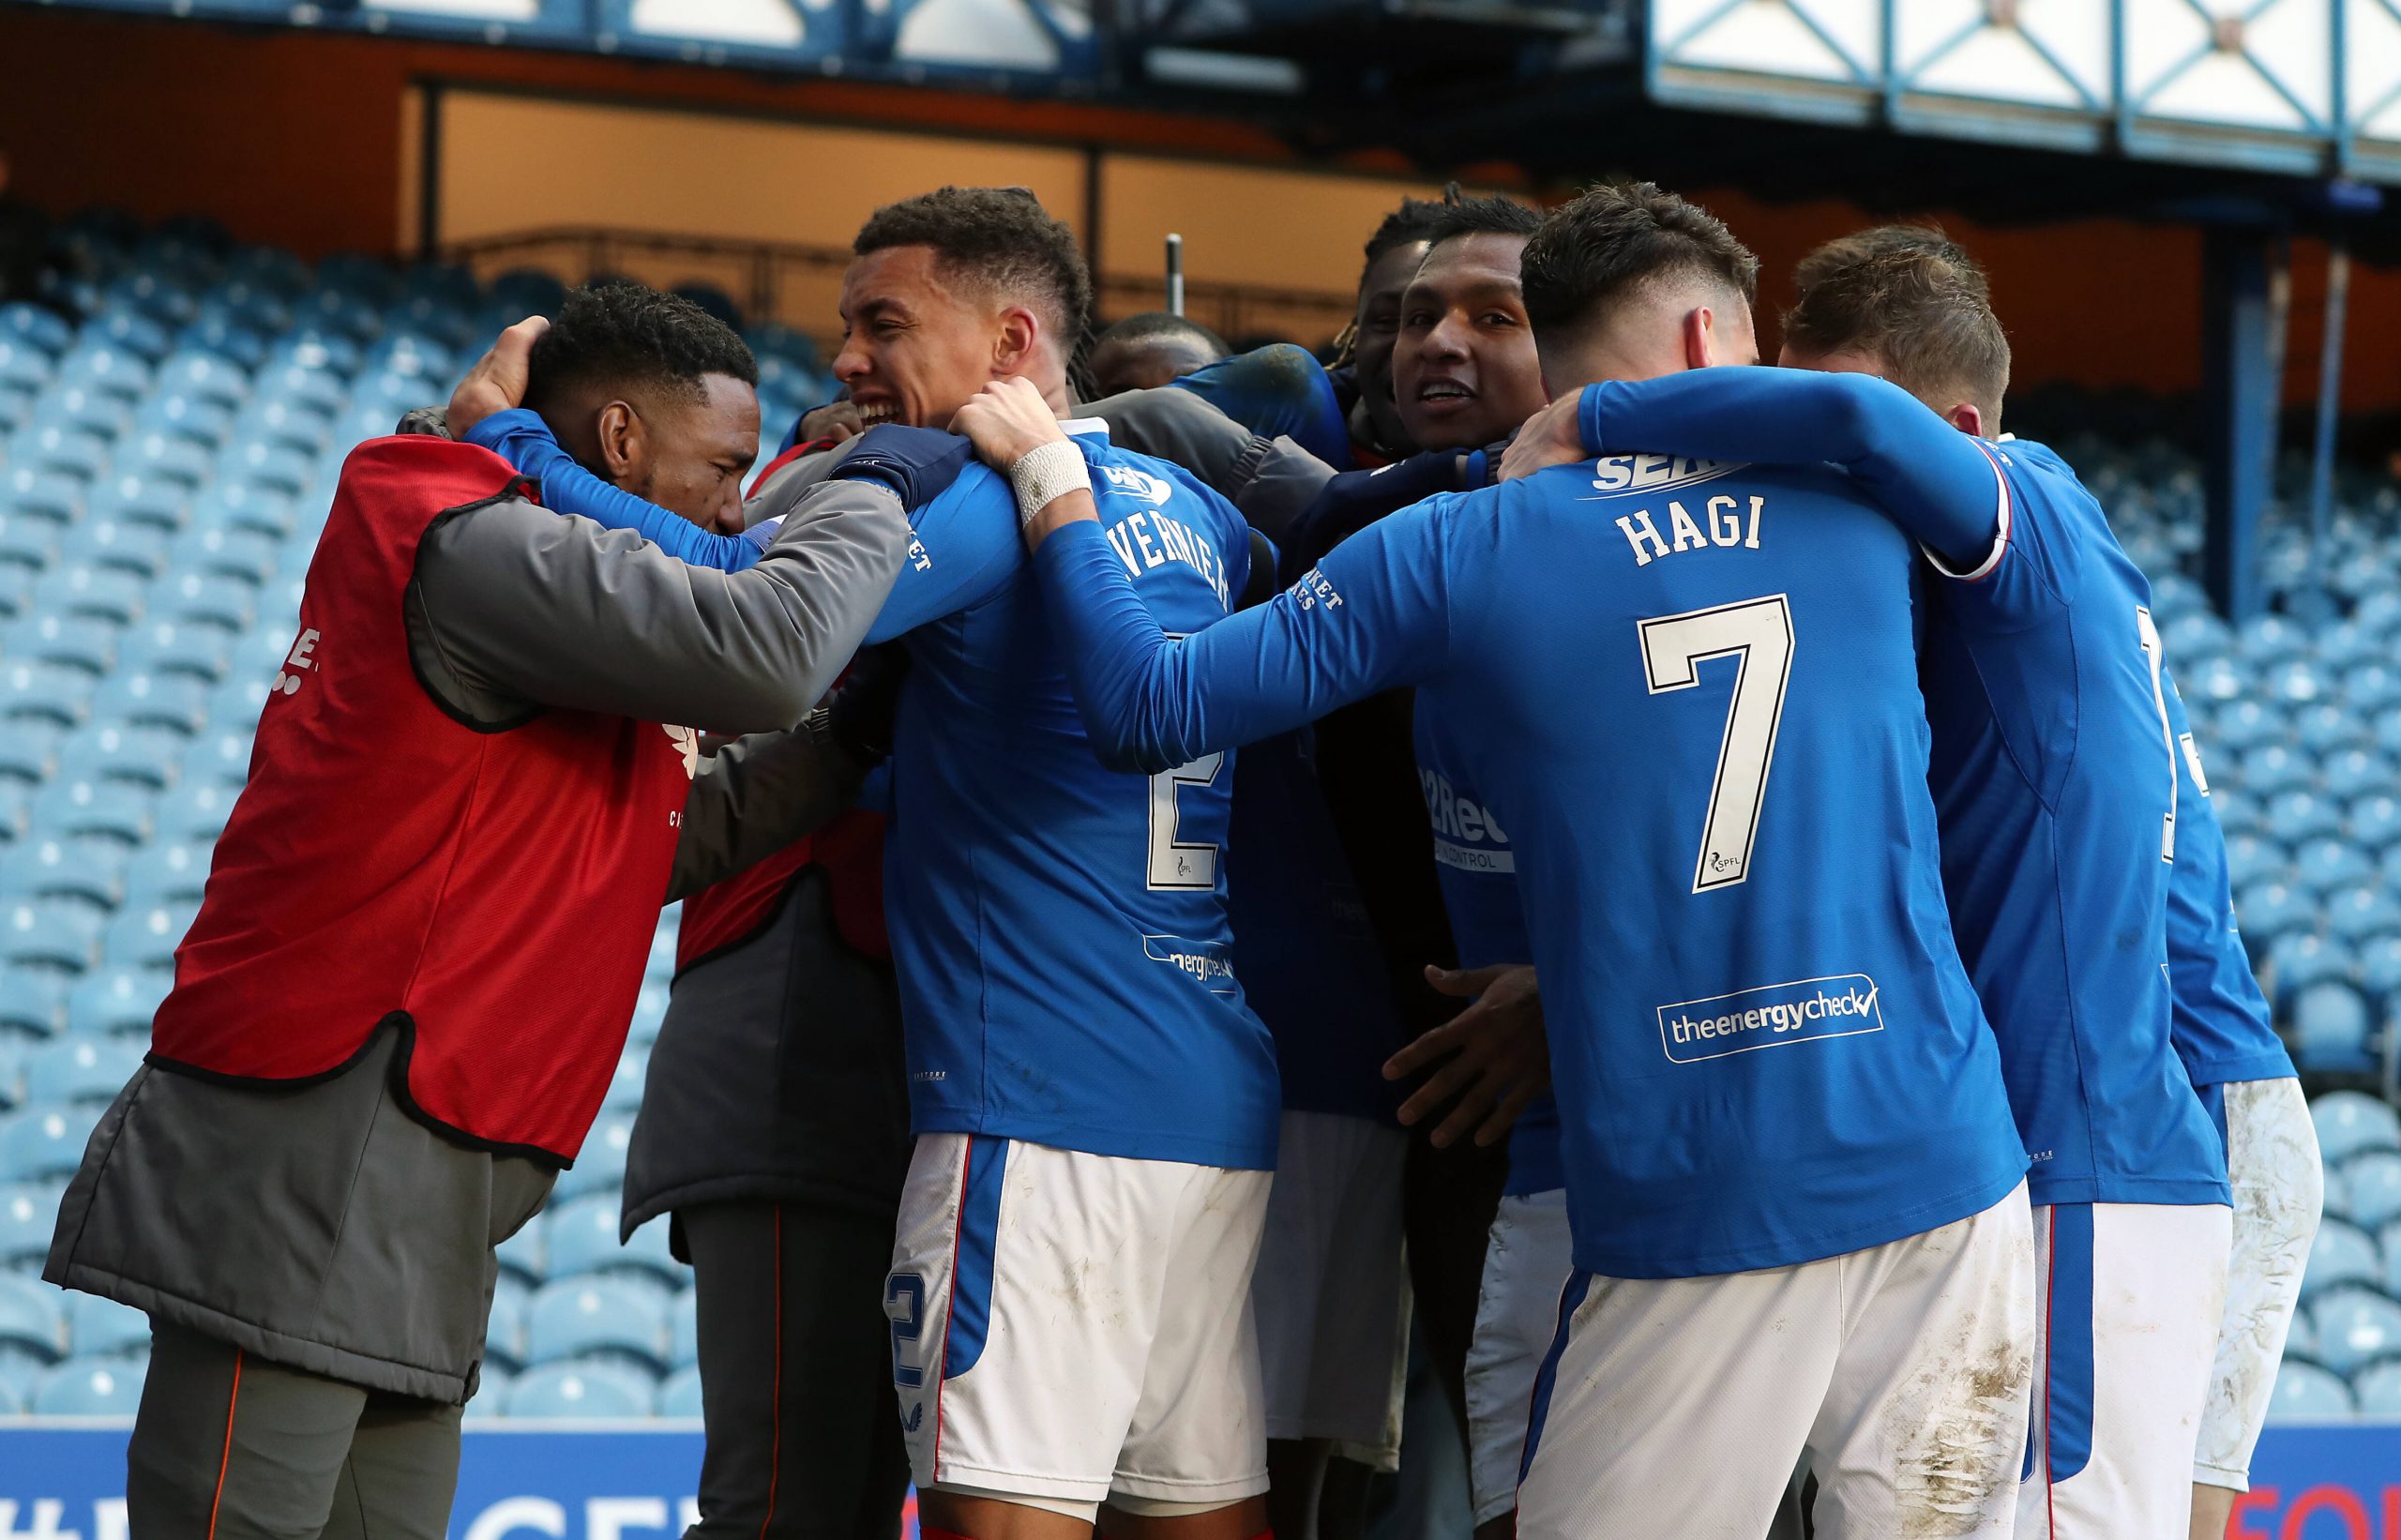 How Did The Fixture Between Celtic And Rangers Play Out - Rangers celebrate